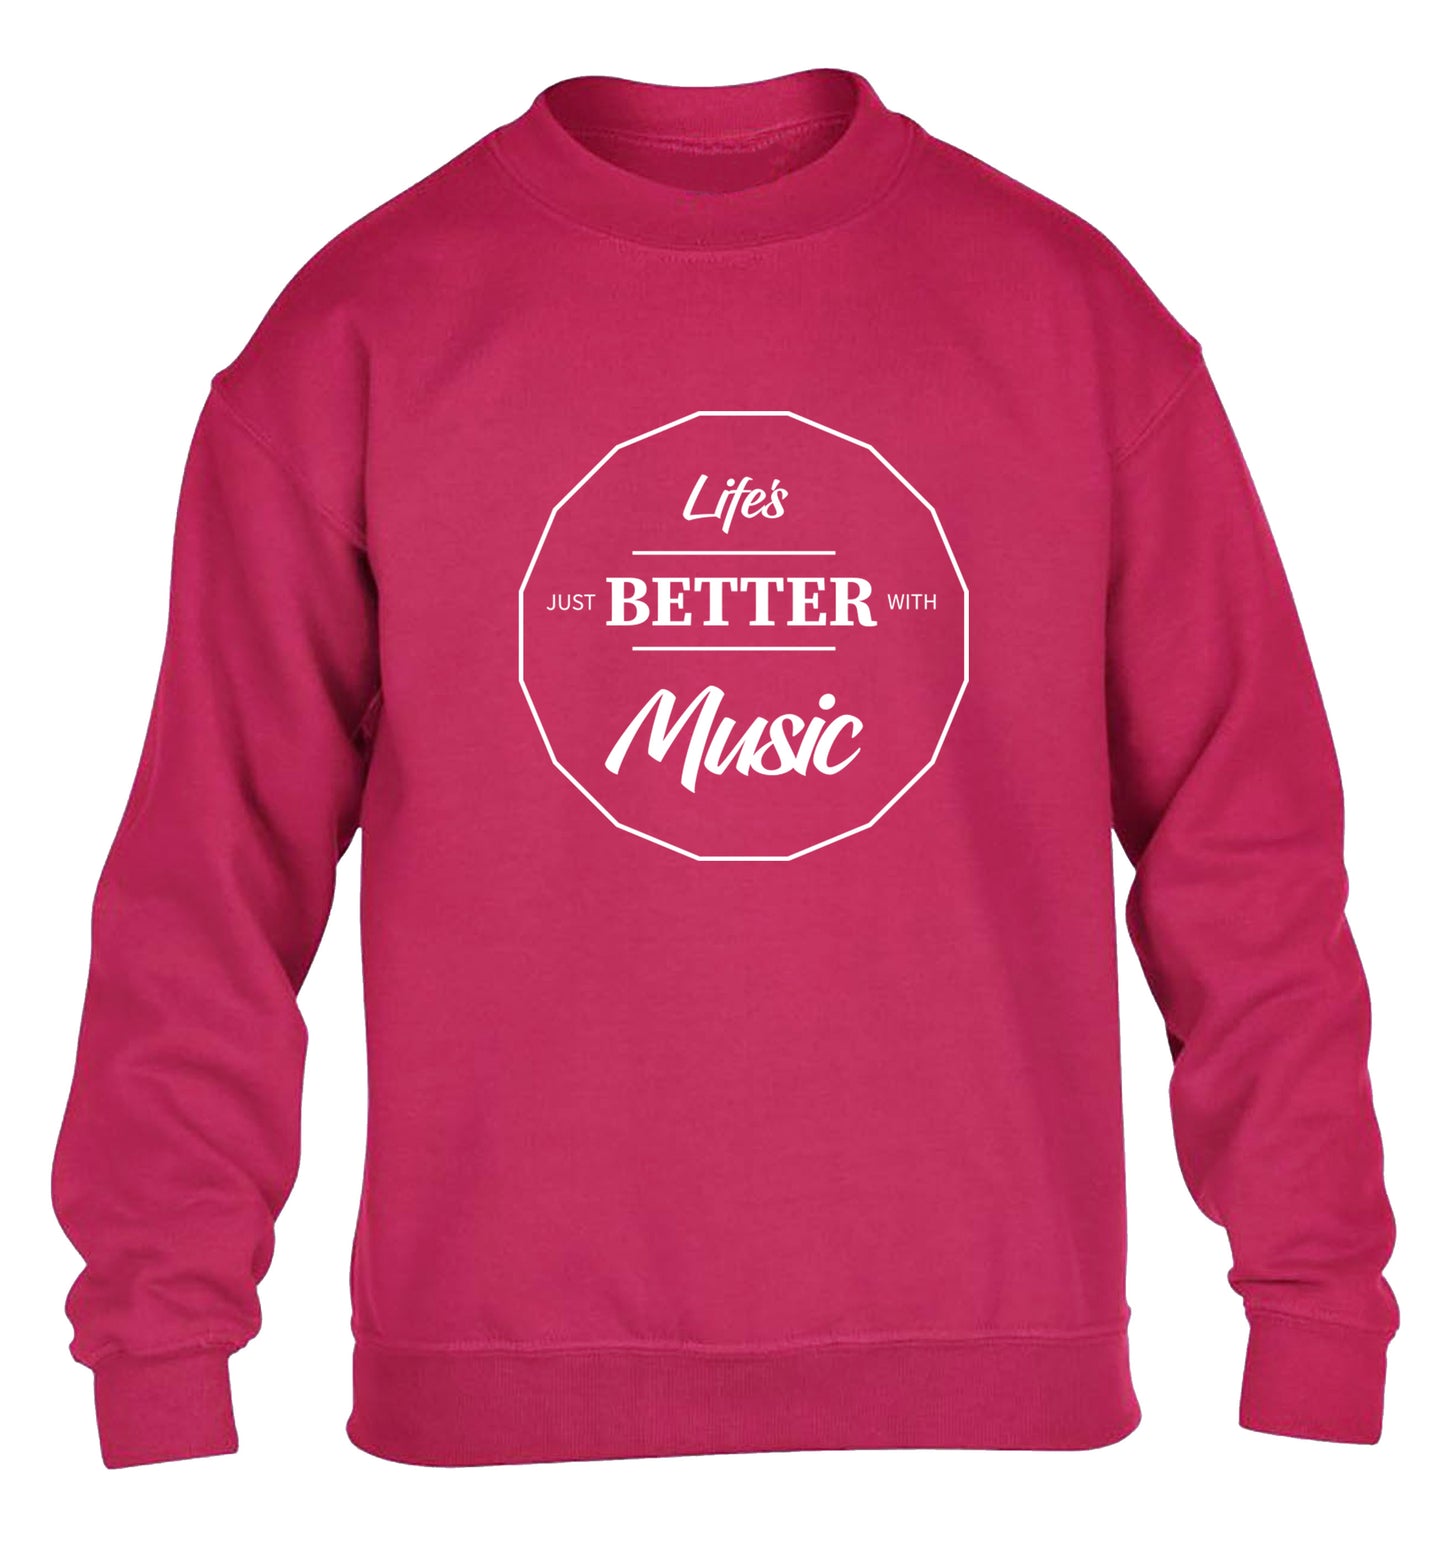 Life is Better With Music children's pink sweater 12-13 Years